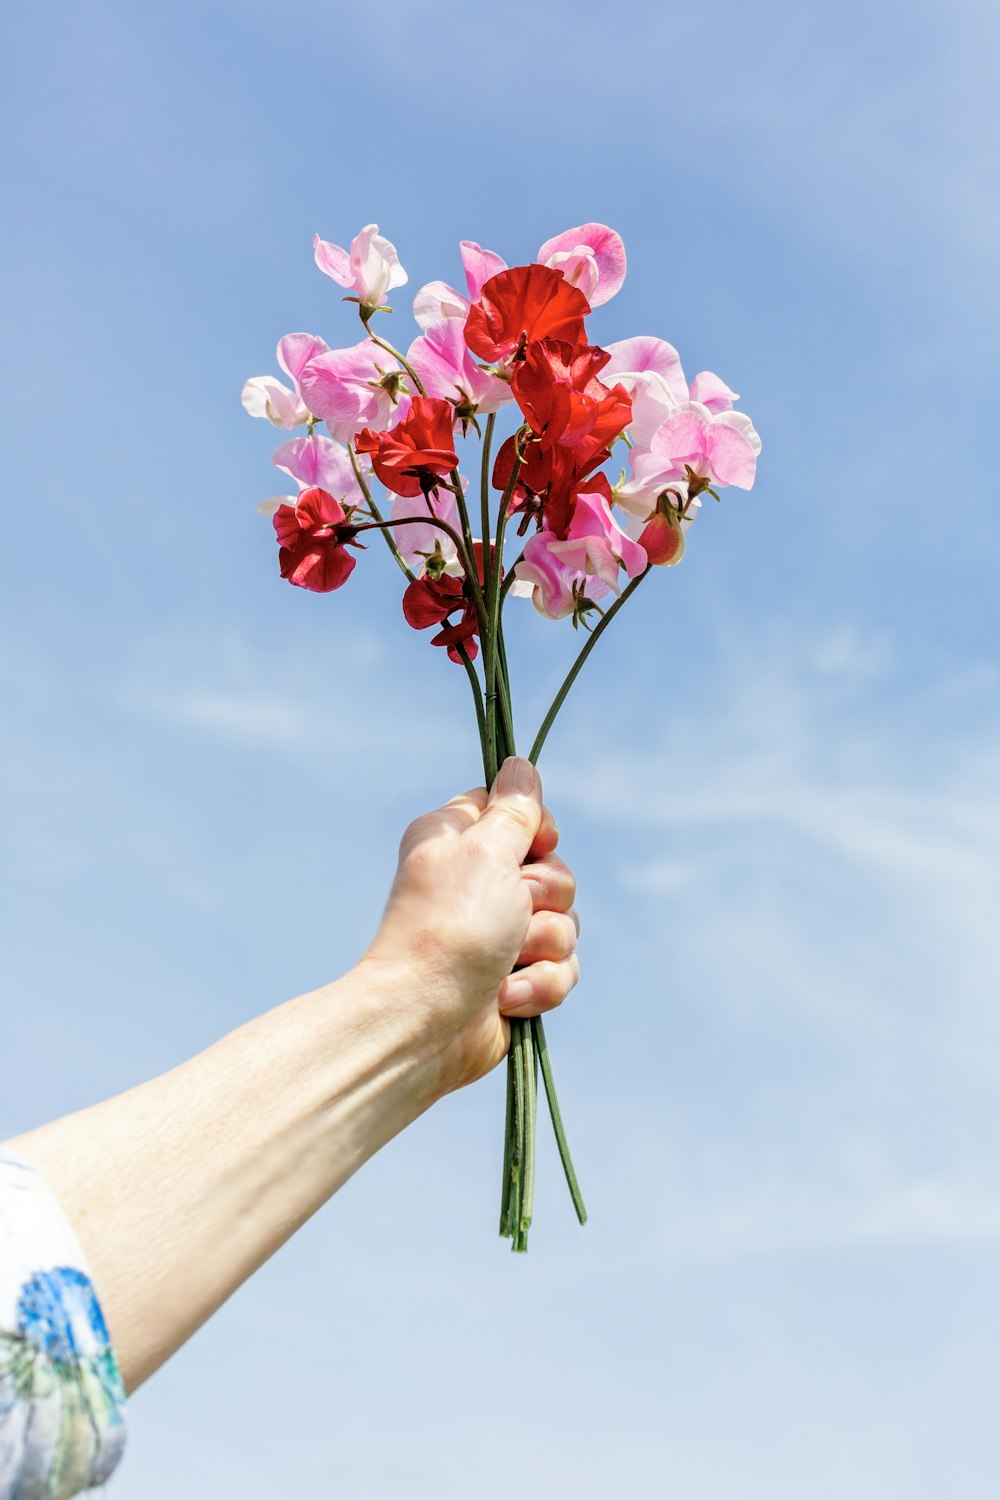 a hand holding a bunch of pink and red flowers